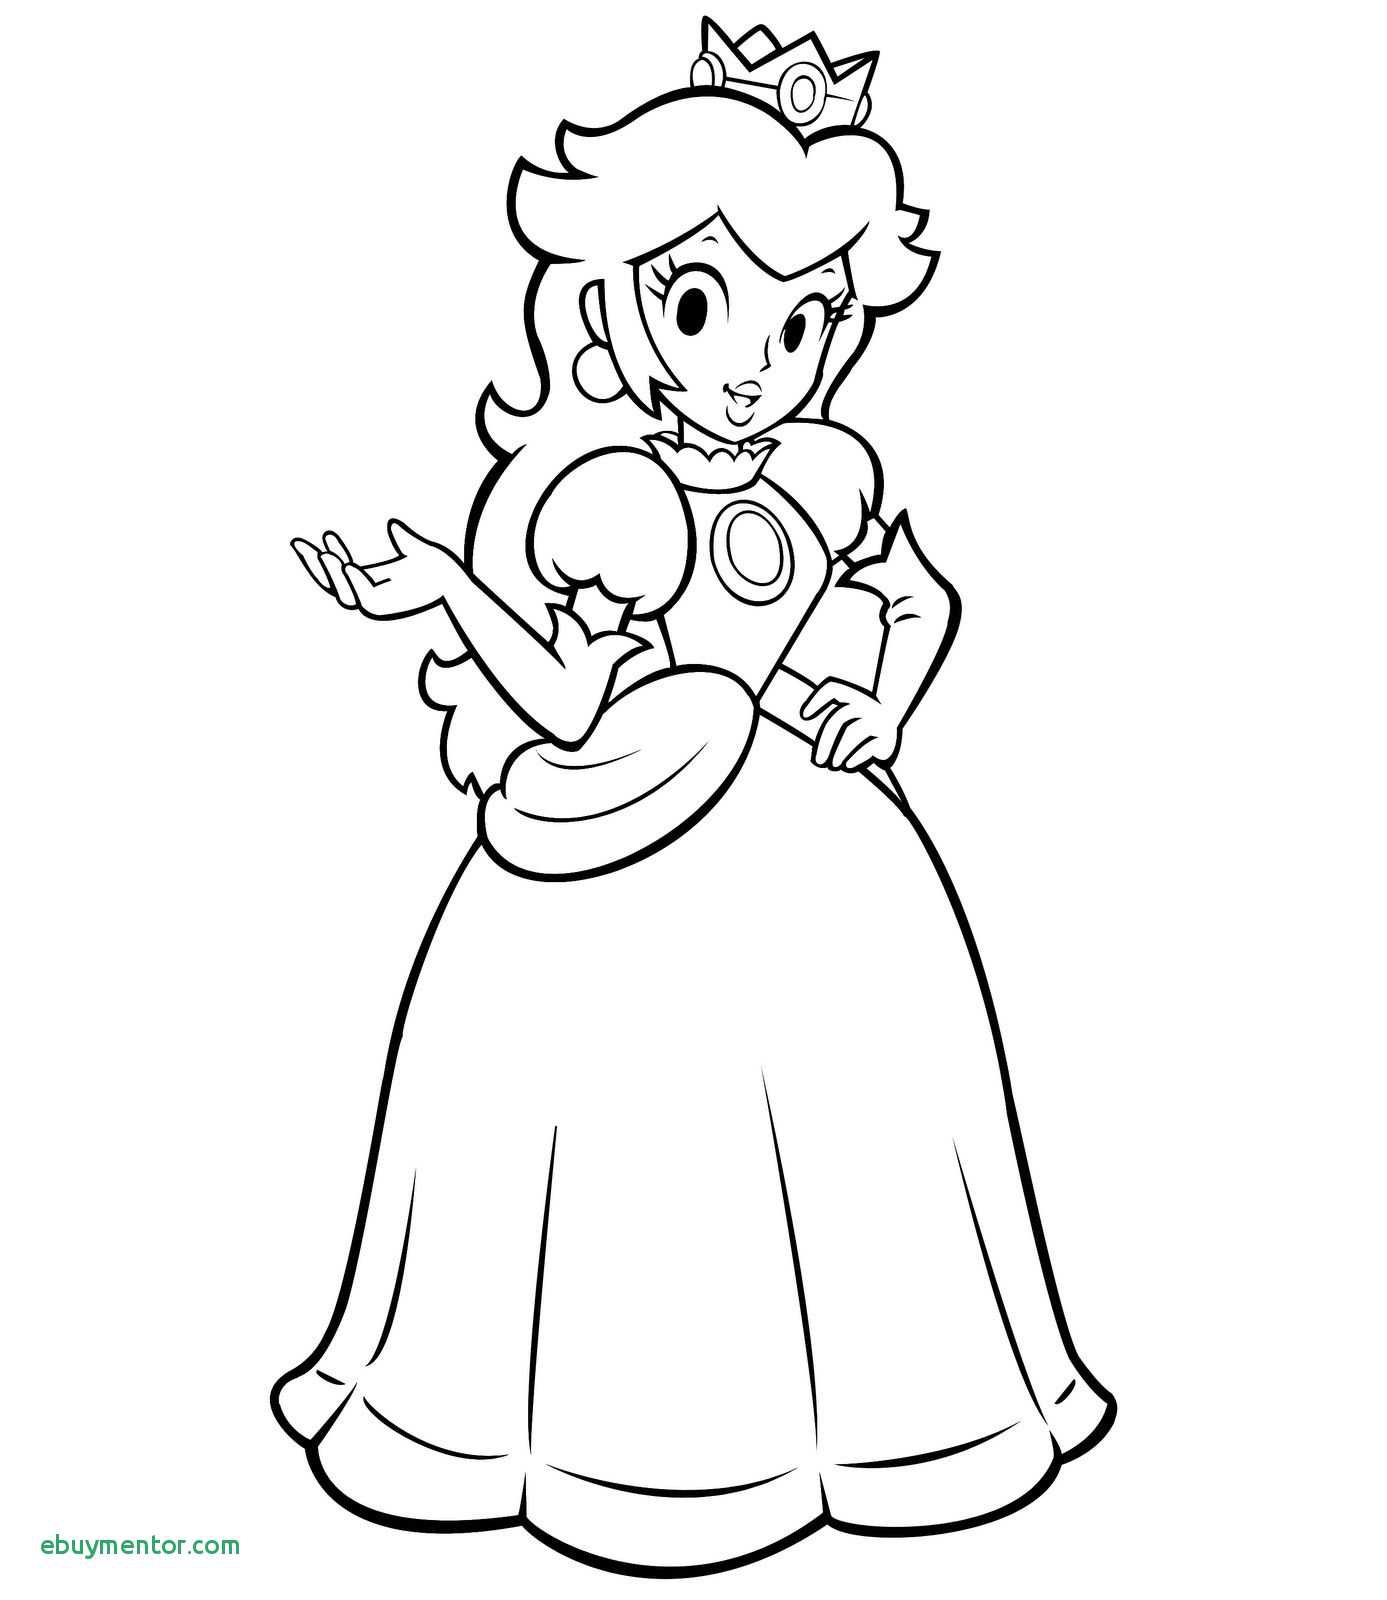 Peach Coloring Pages 2456 230—230 New Princess Peach Cute Printable